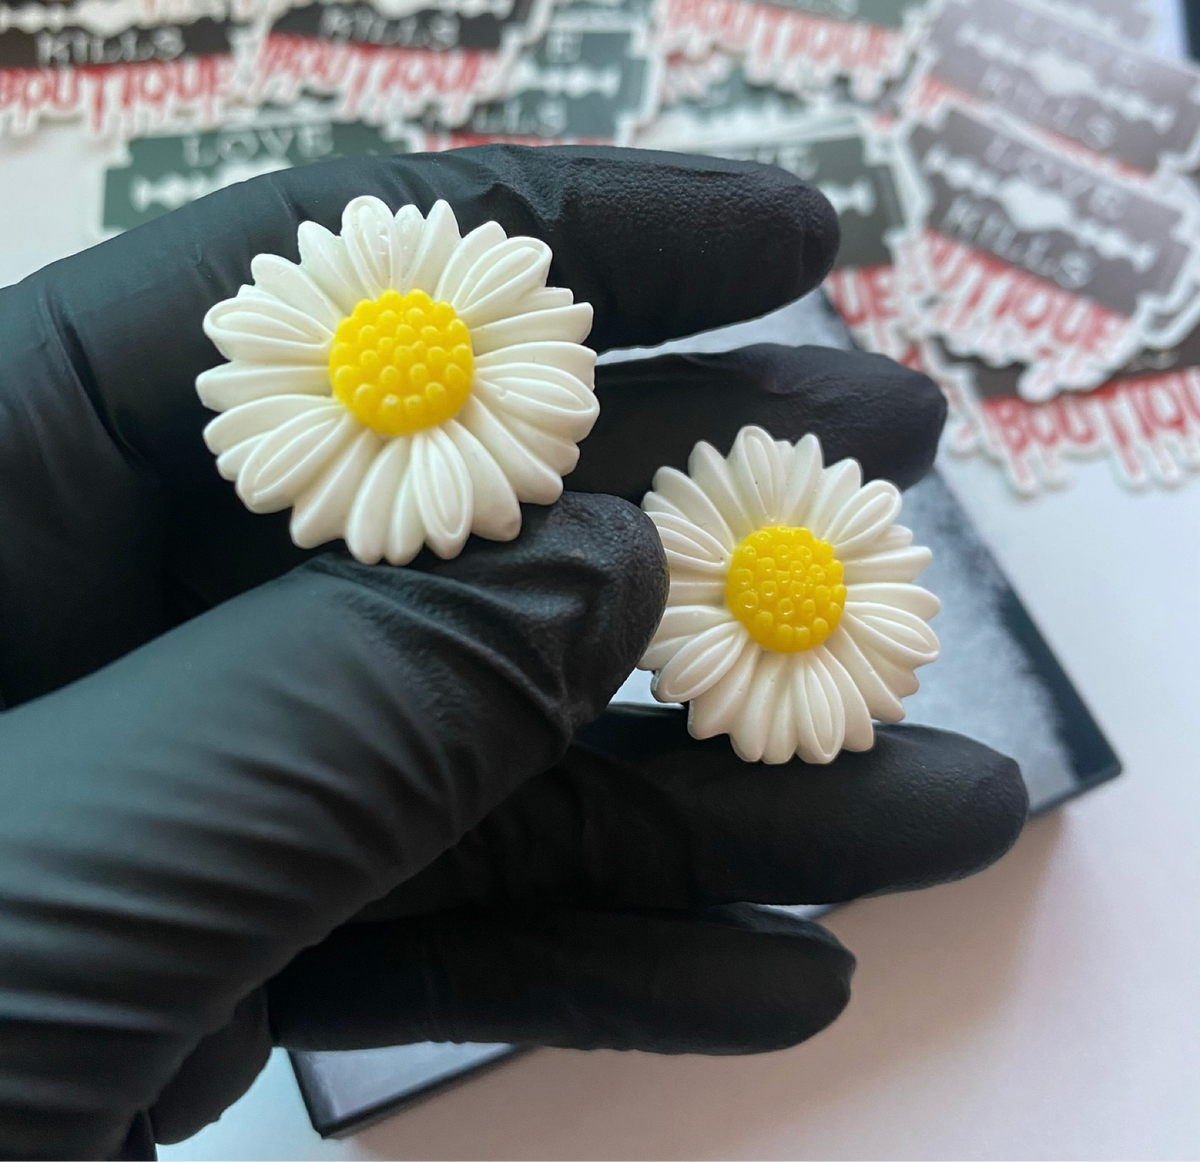 Daisy flower plugs, gauges for stretched lobes.